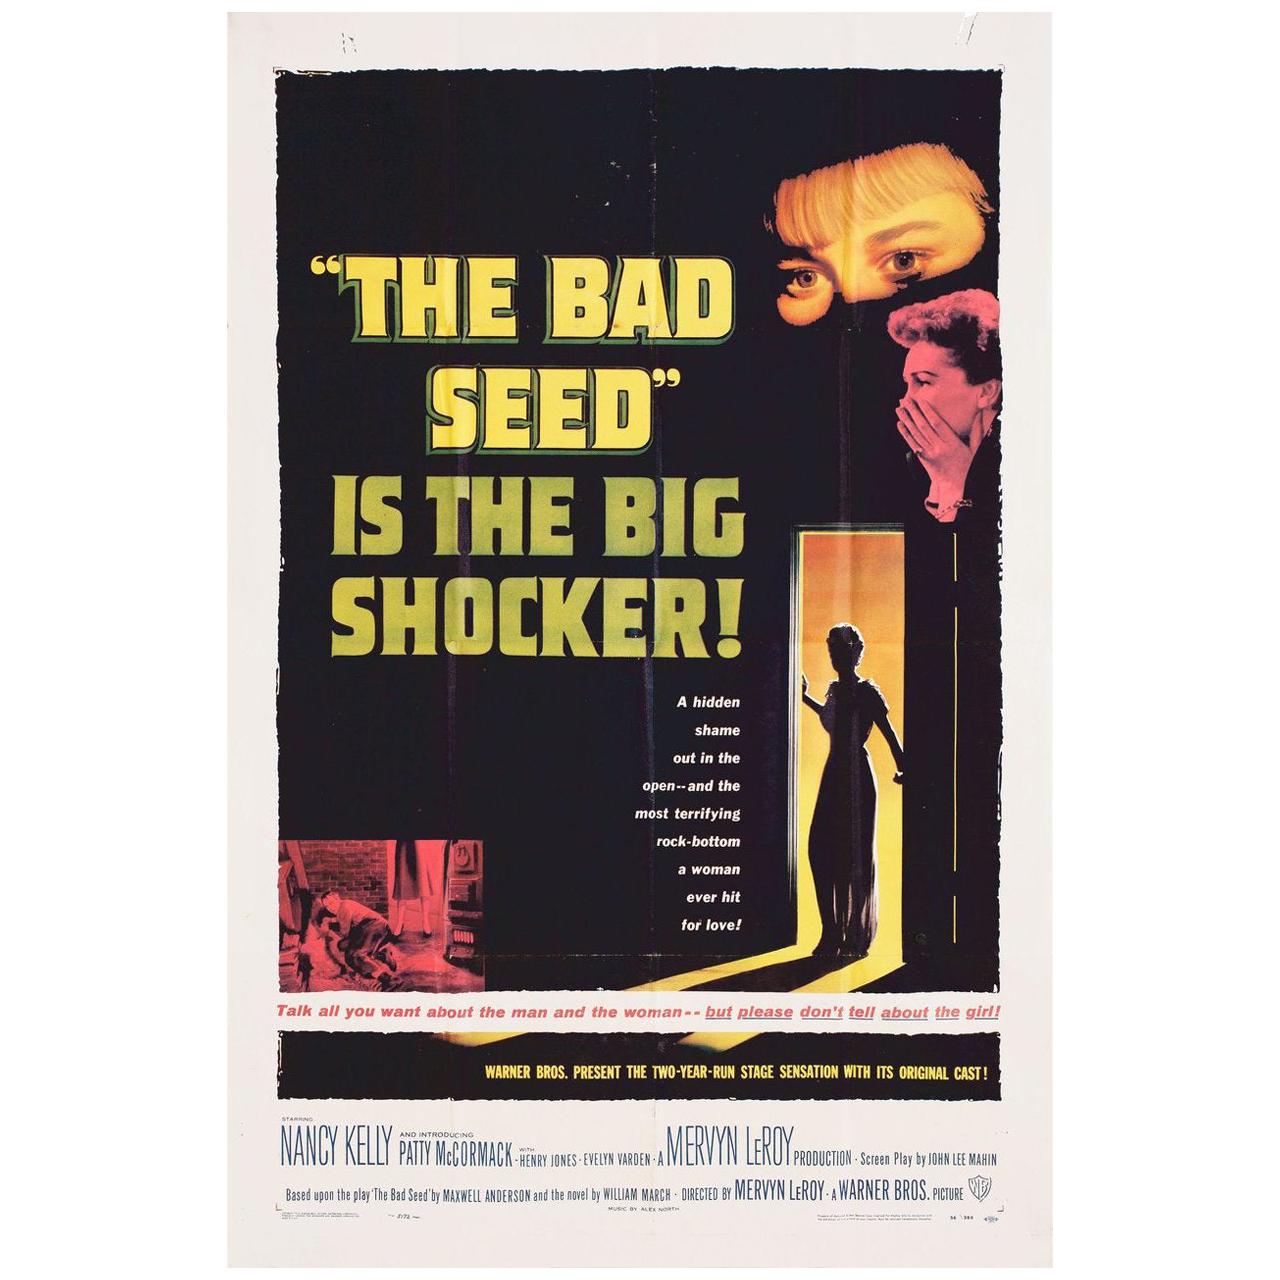 The Bad Seed 1956 U.S. One Sheet Film Poster